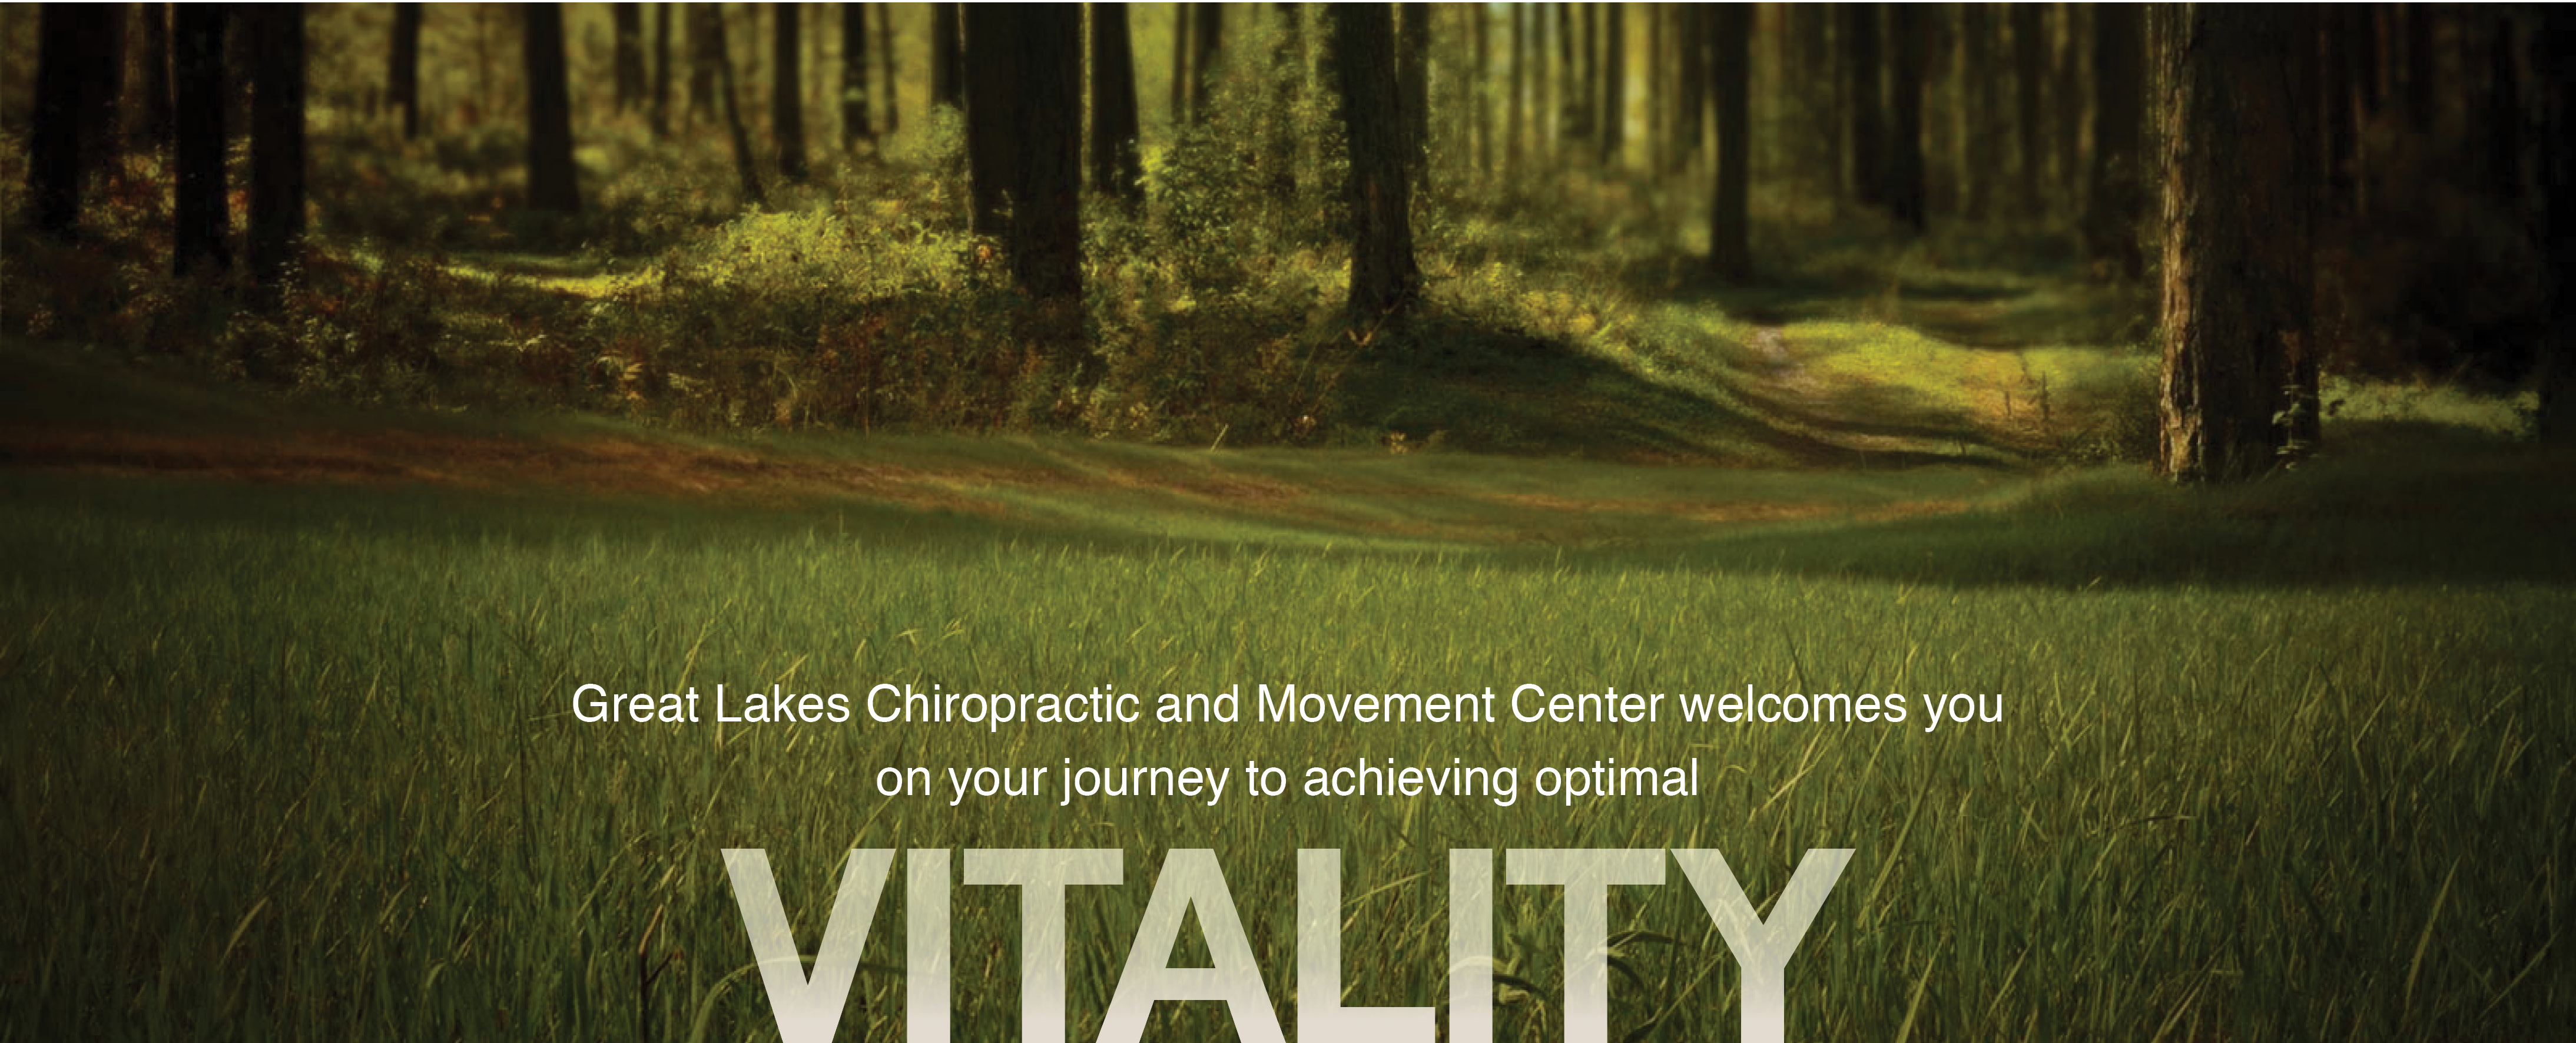 Great-Lakes-Chiropractic-Movement-Center-Nature-Vitality_Slide